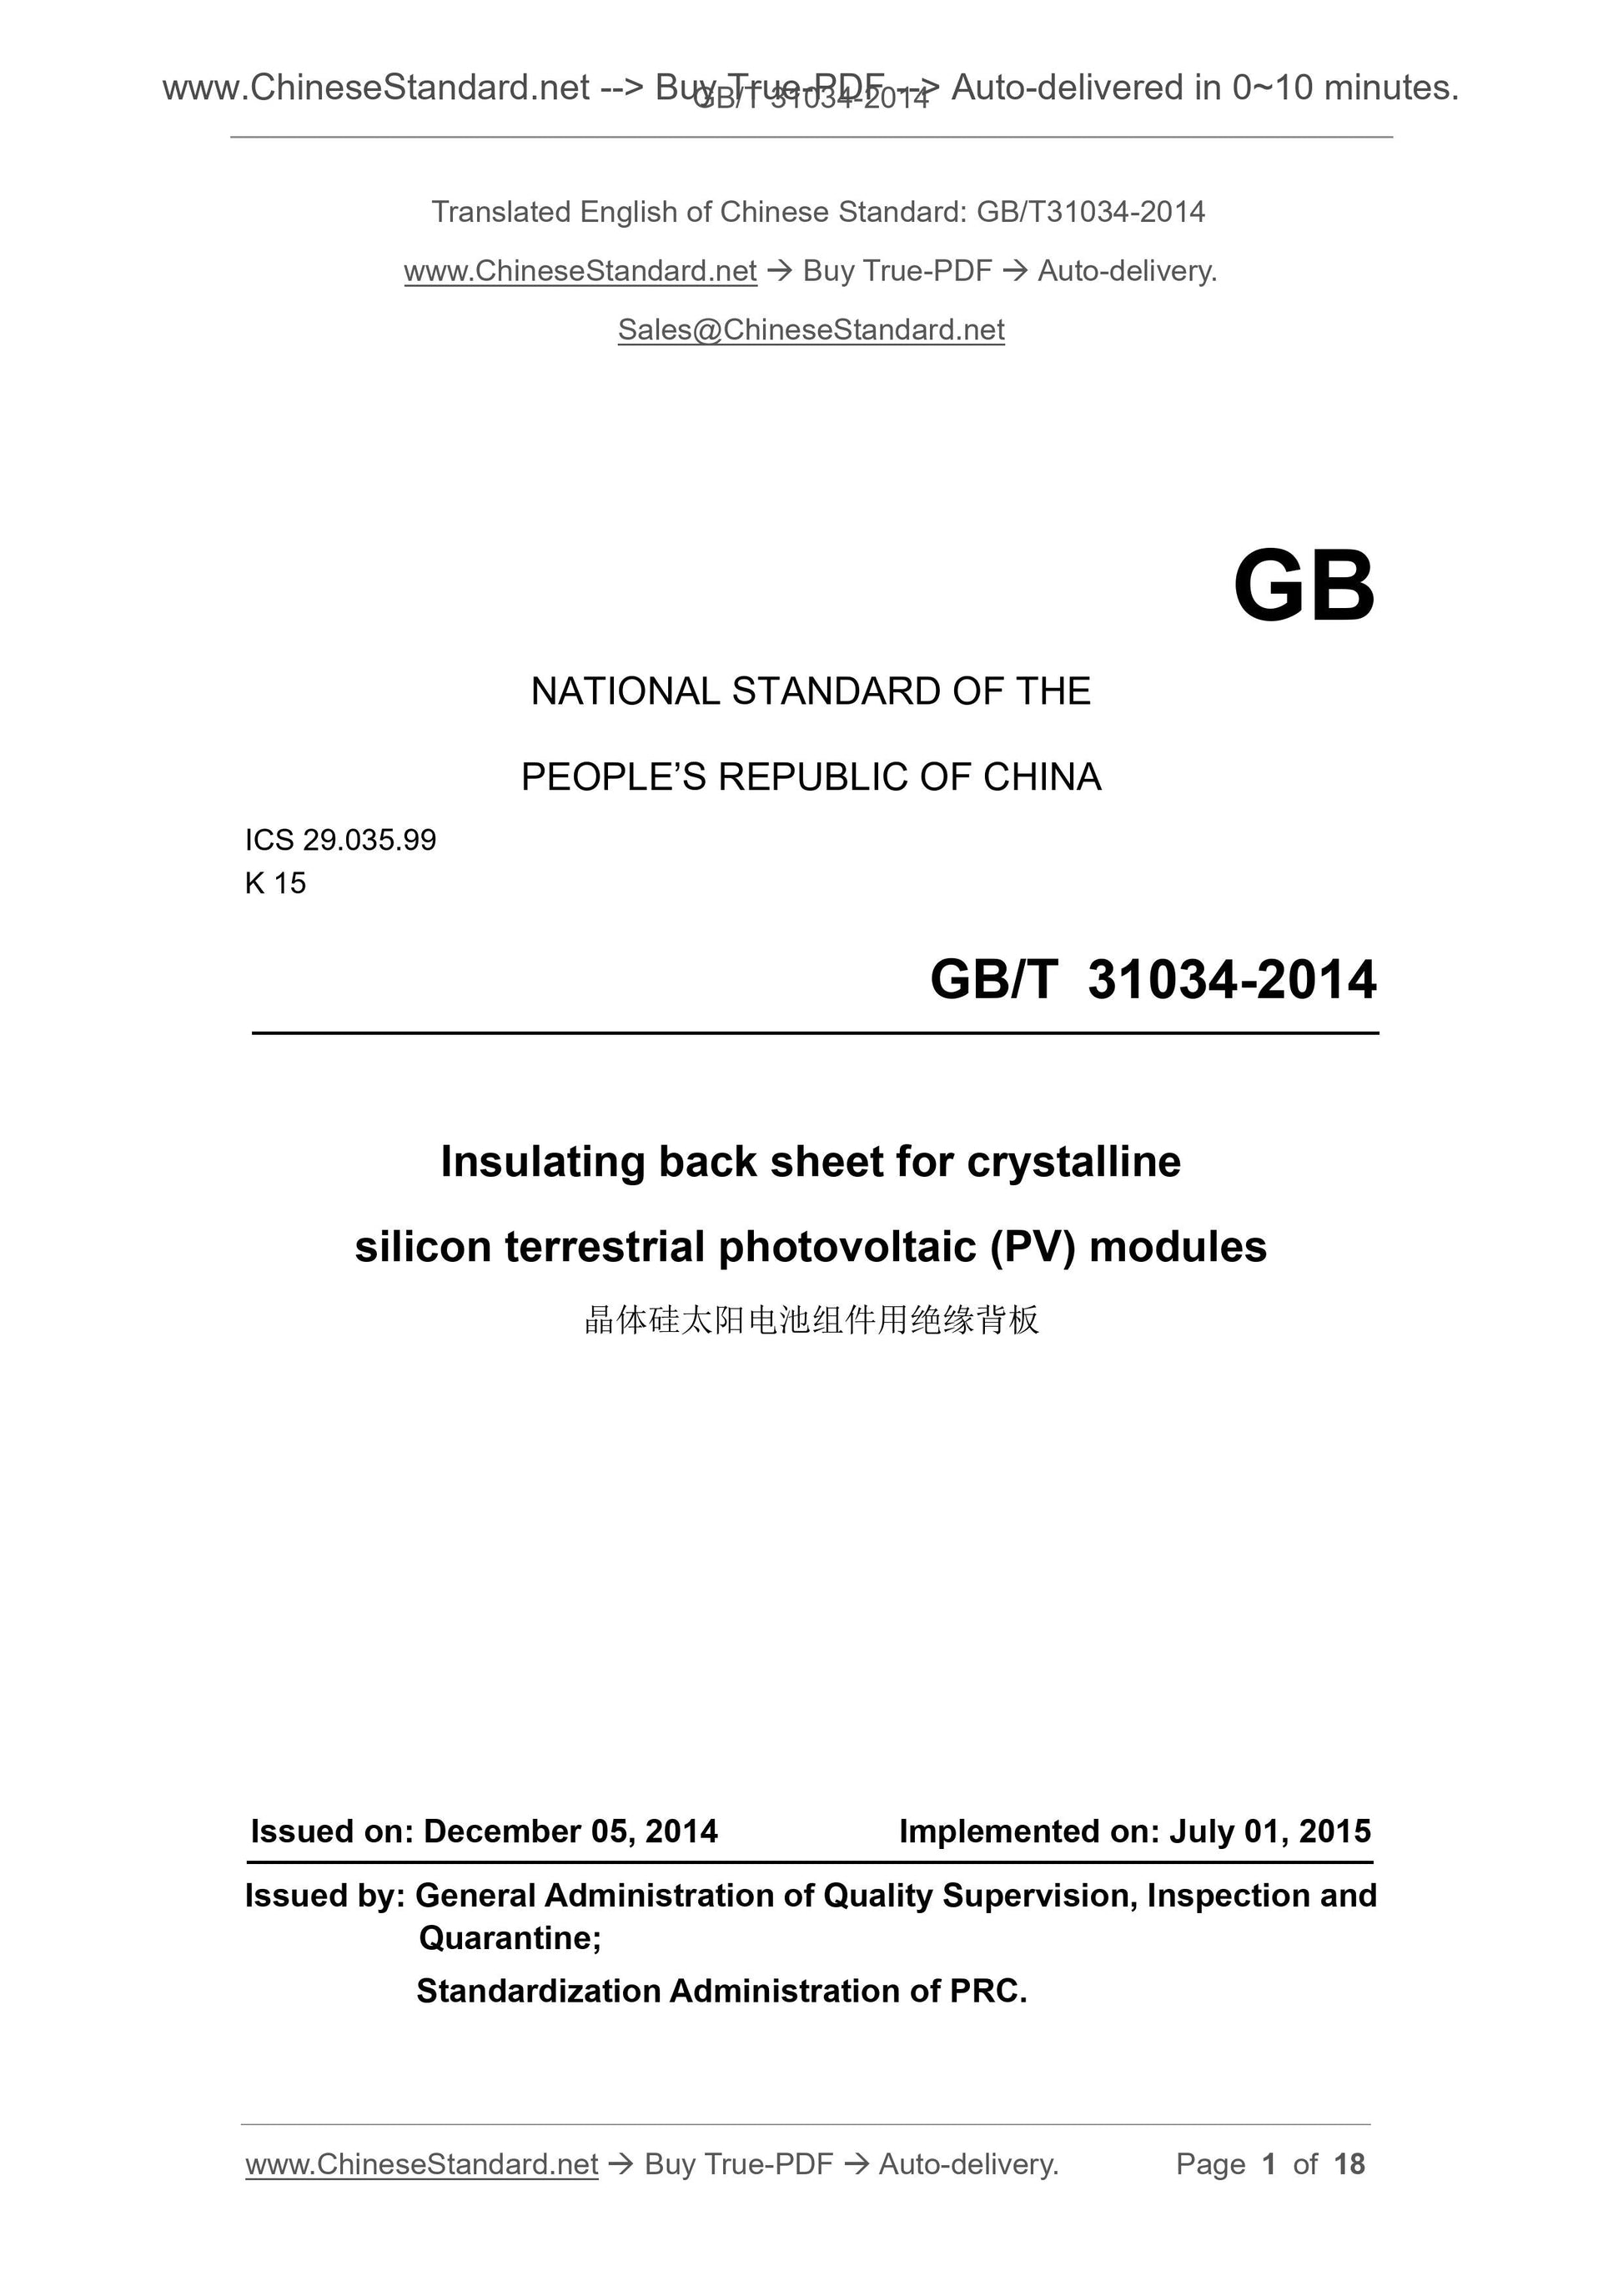 GB/T 31034-2014 Page 1